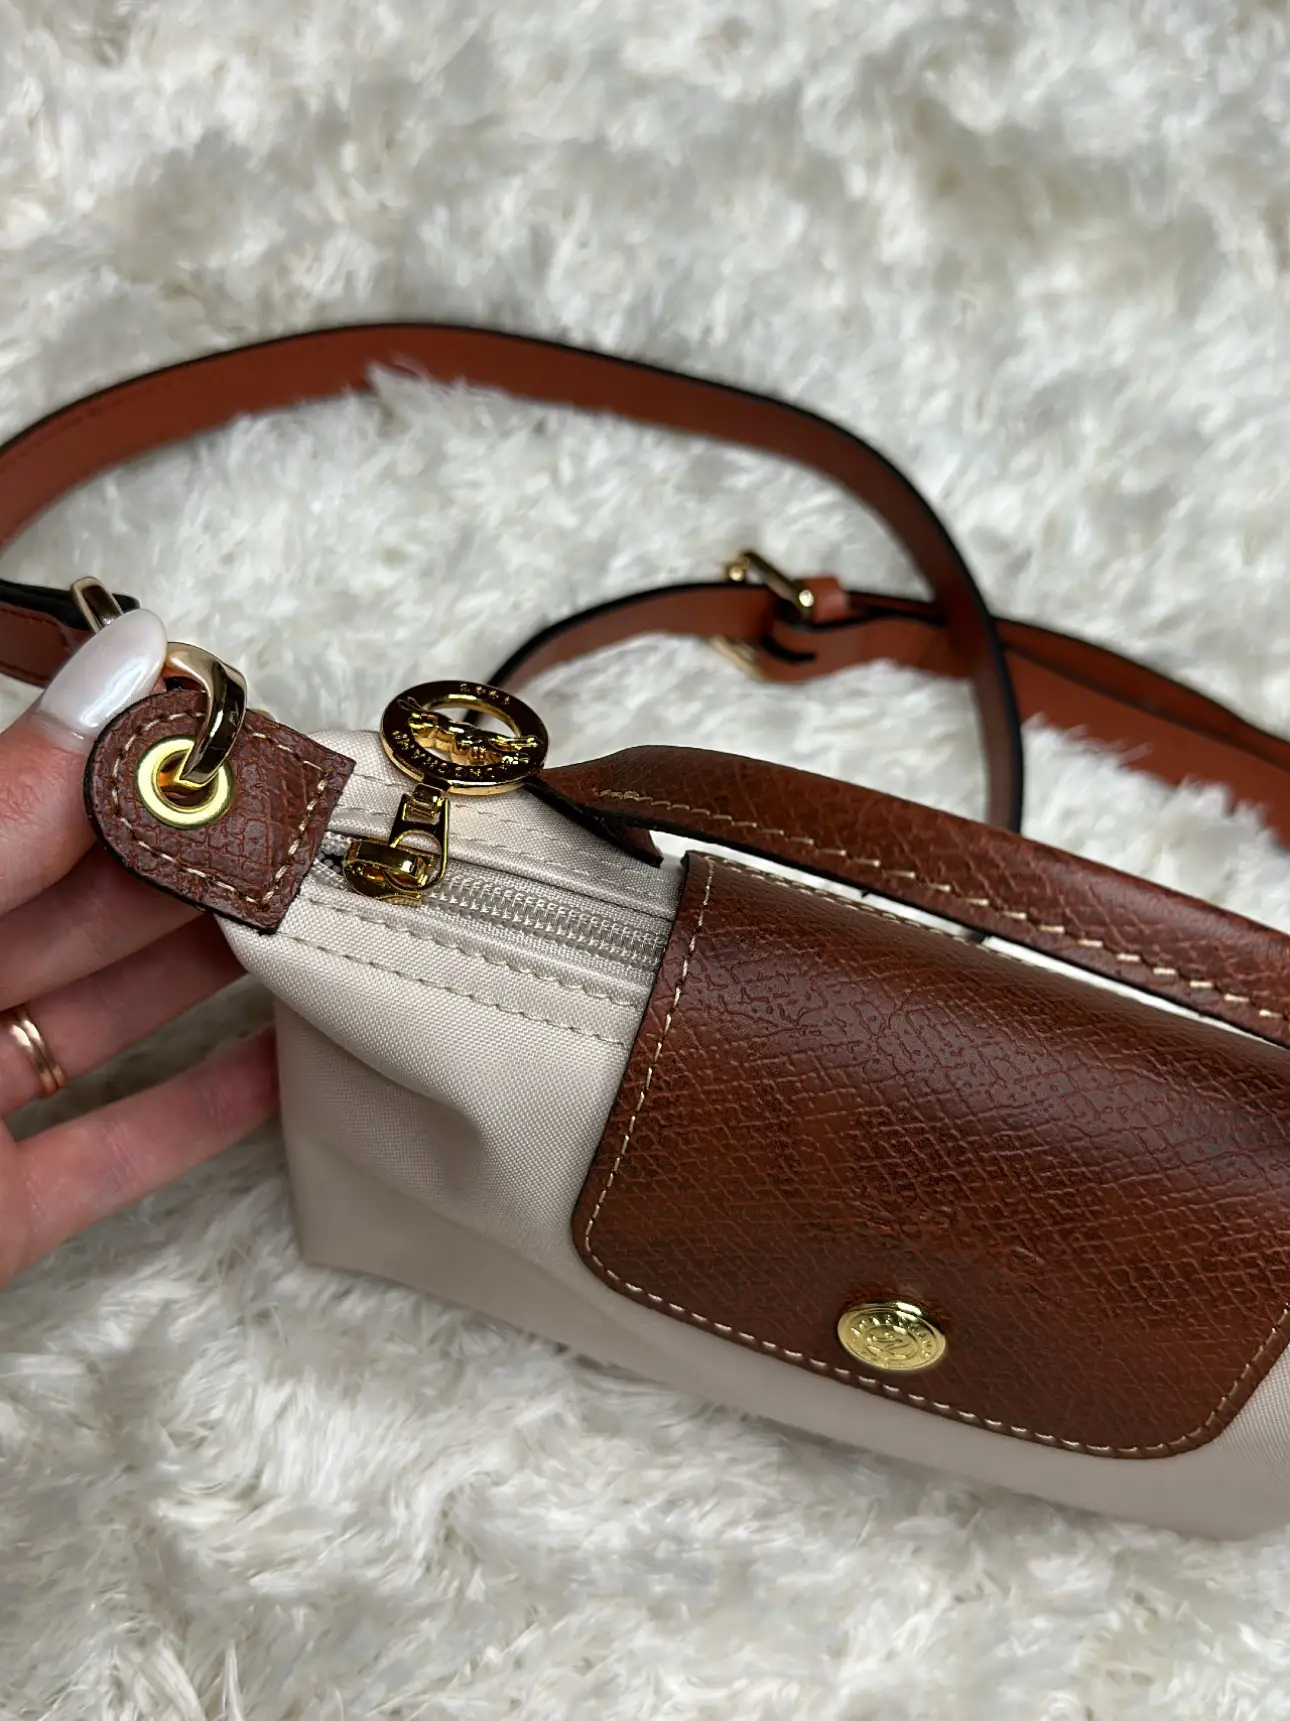 Hello Catwalk City on Instagram: I converted my Longchamp le pliage pouch  into a cute little crossbody bag!! Got this kit from  @dressupyourpurse_store and it's absolutely perfect! 👌 The leather and  hardware